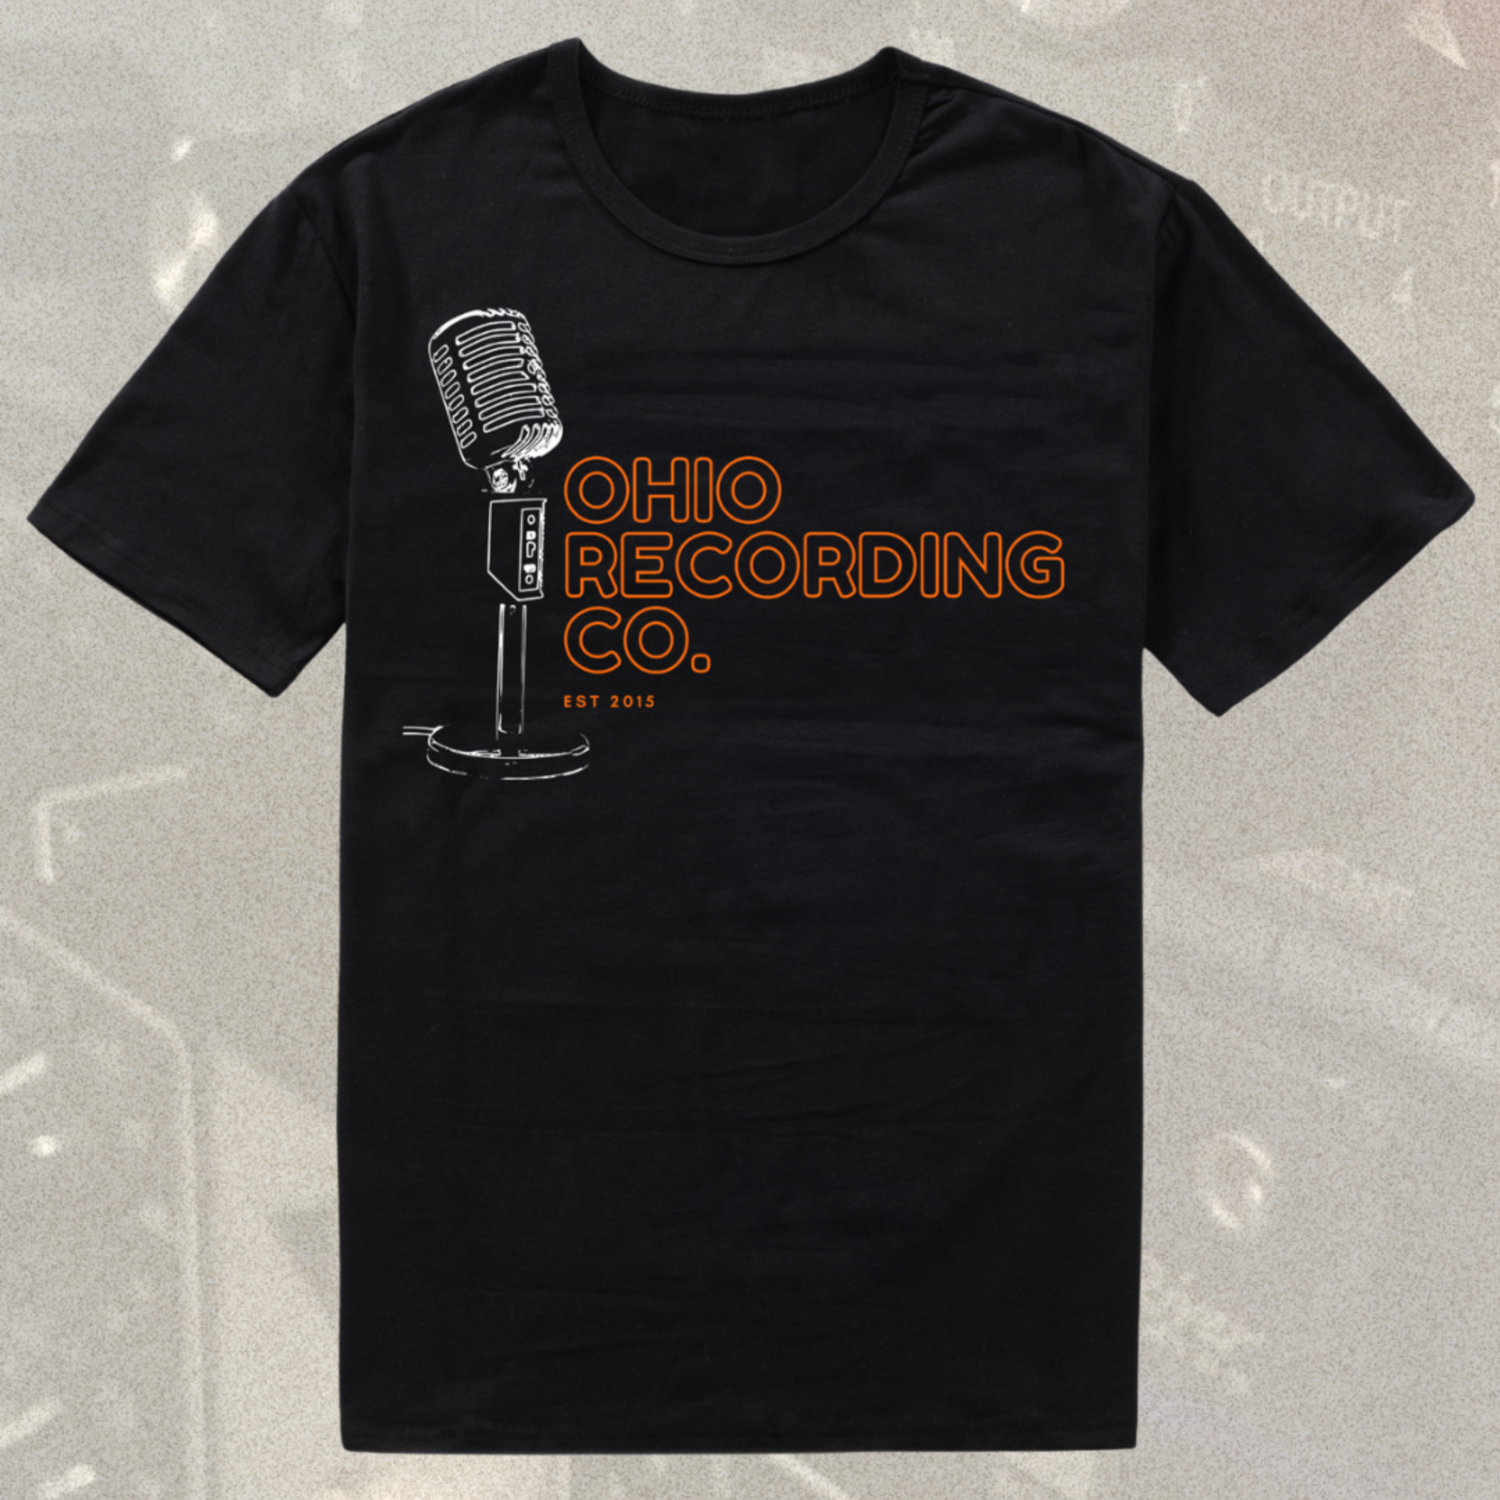 Ohio Recording Co. 7th Anniversary Limited Edition T-Shirt